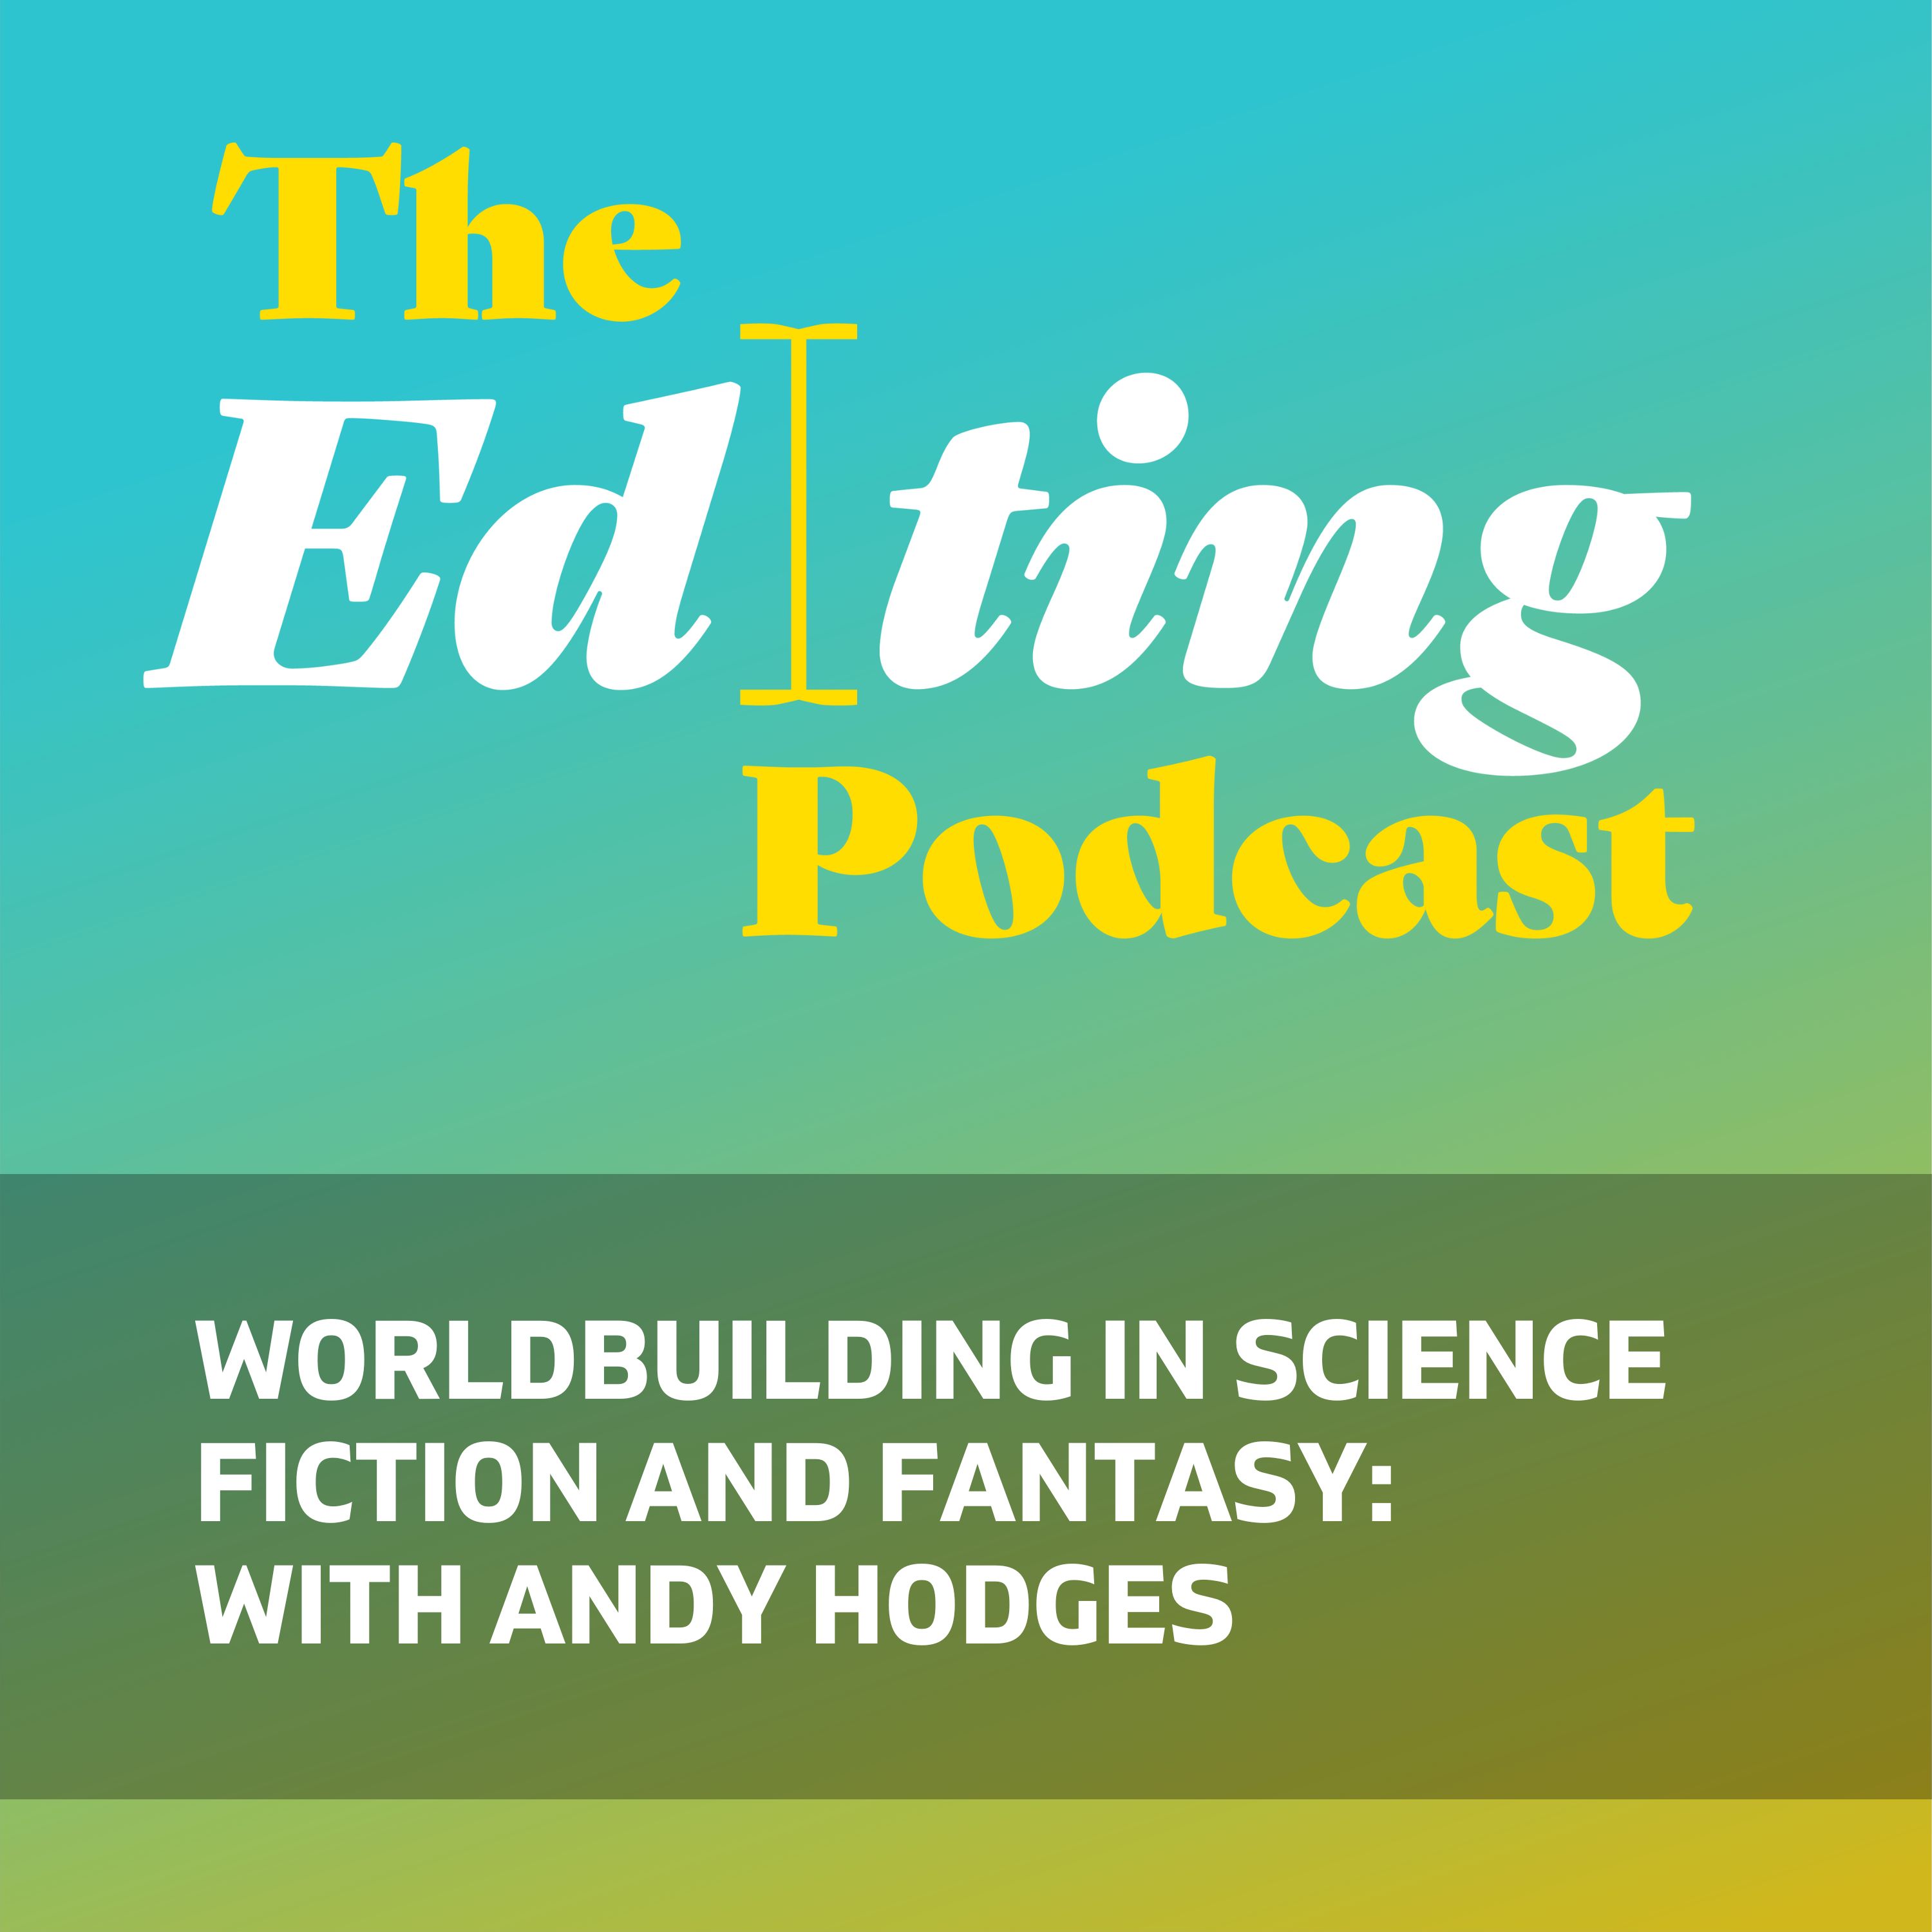 Worldbuilding in science fiction and fantasy: With Andy Hodges